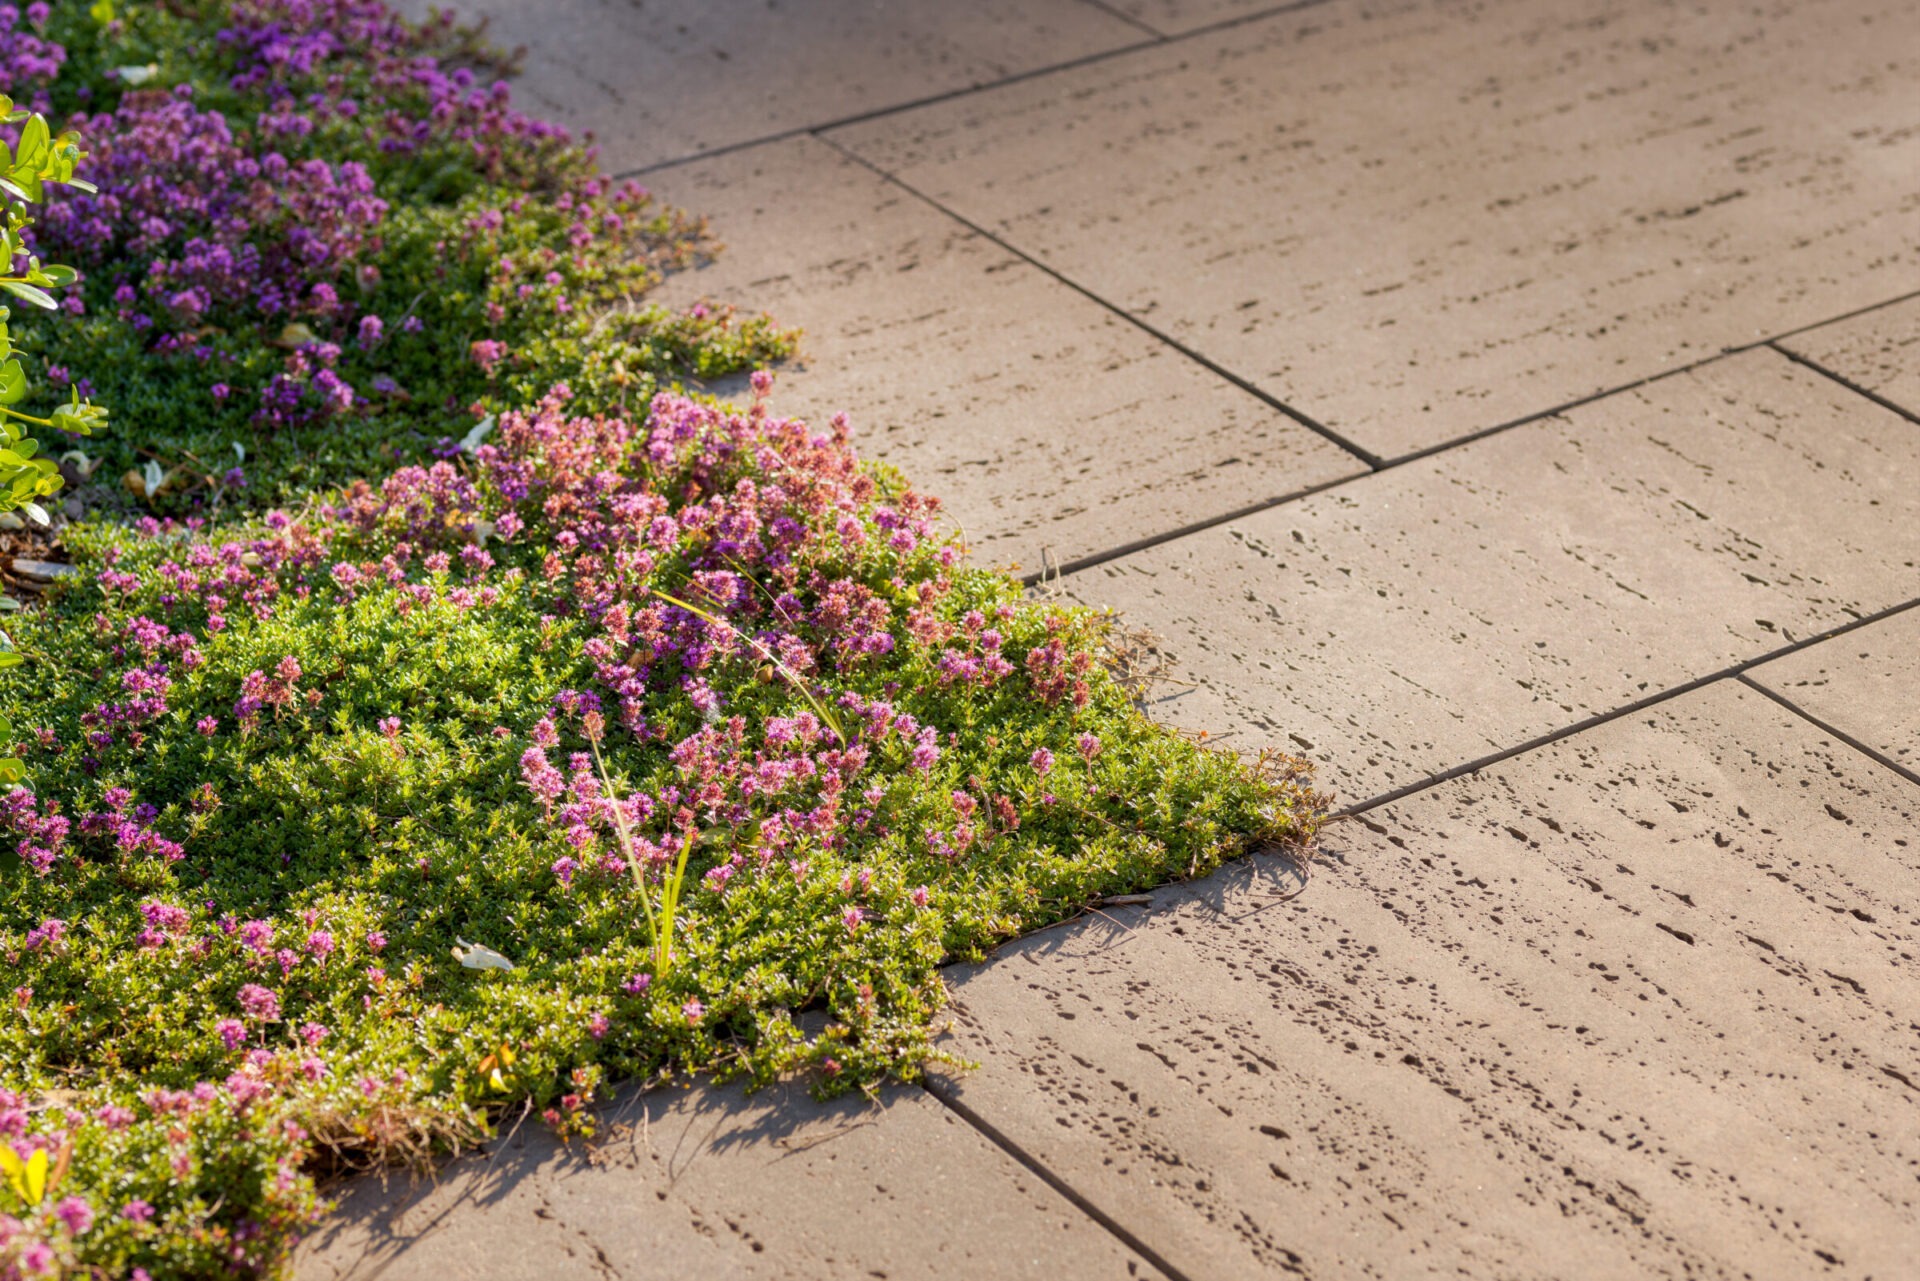 A neatly paved sidewalk bordered by lush greenery and pink flowering plants, with soft sunlight casting delicate shadows on the surface.